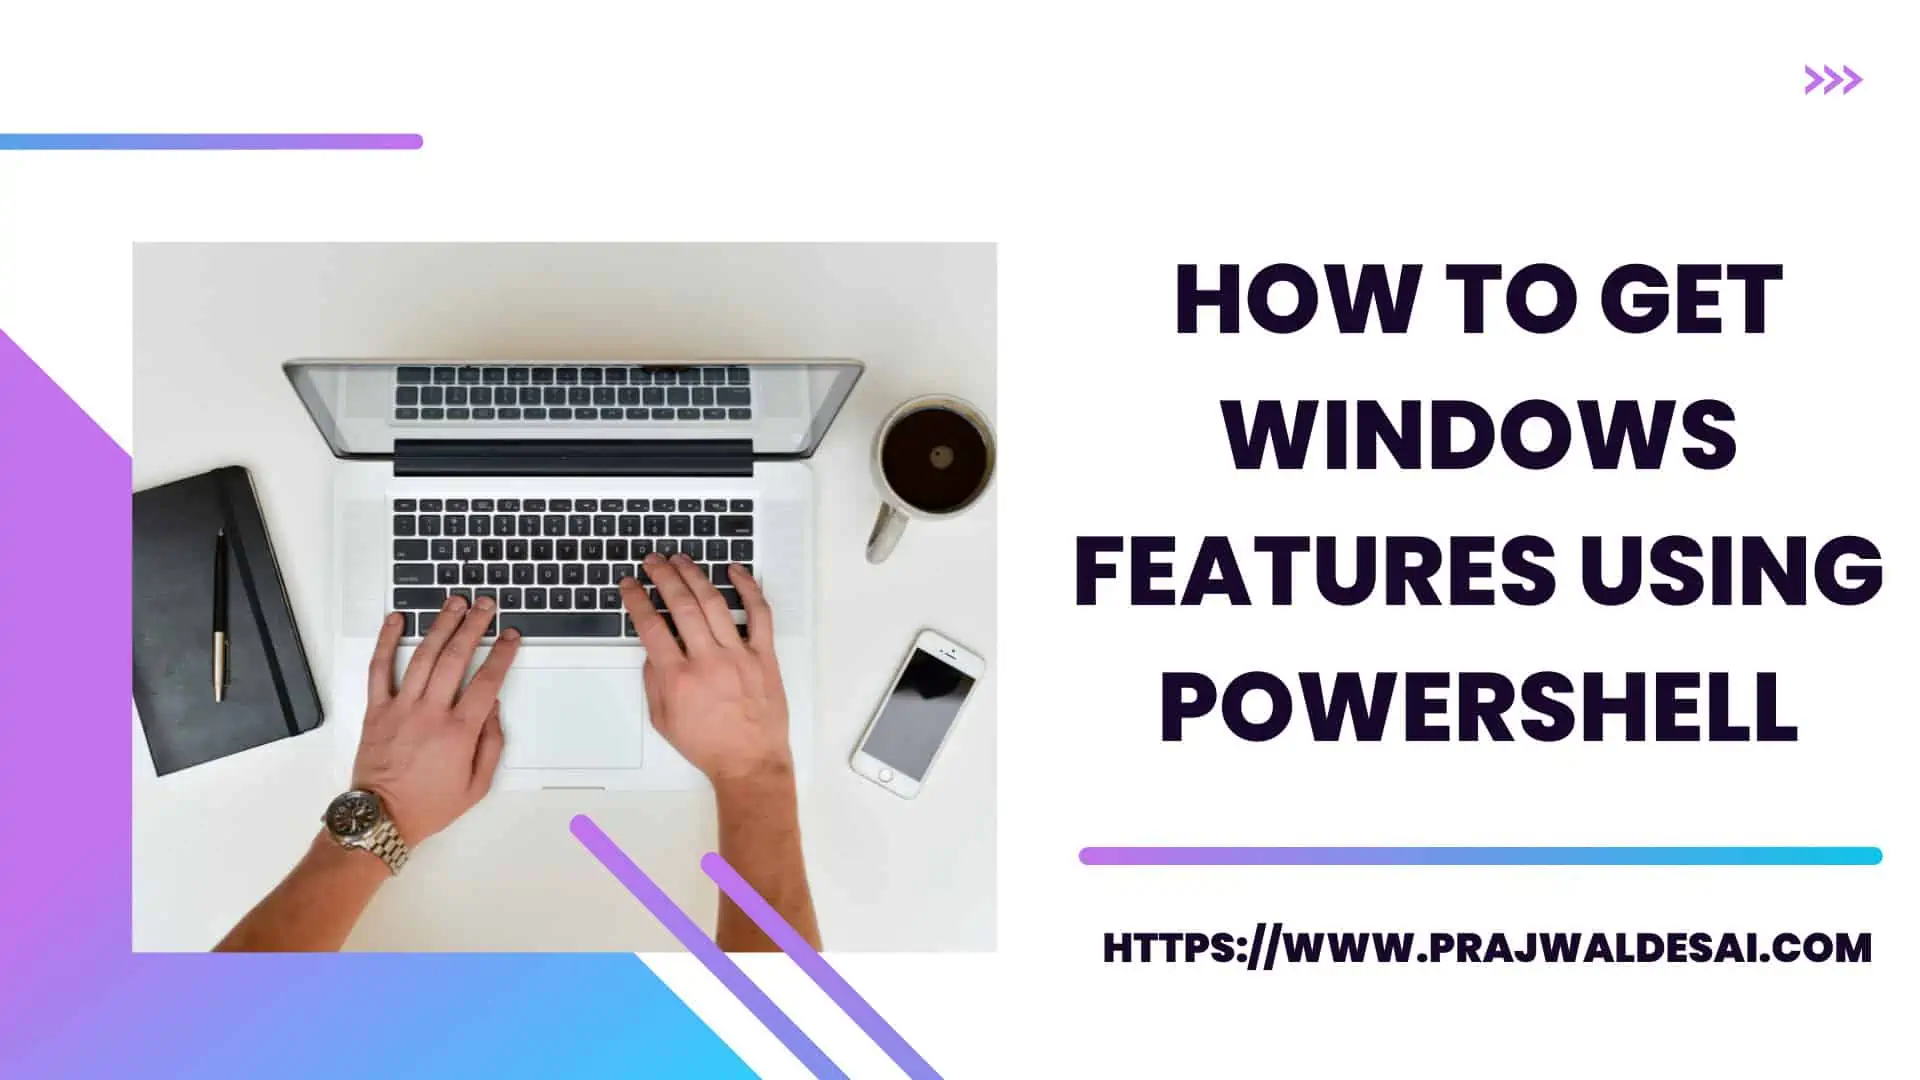 How to Get Windows Features using PowerShell